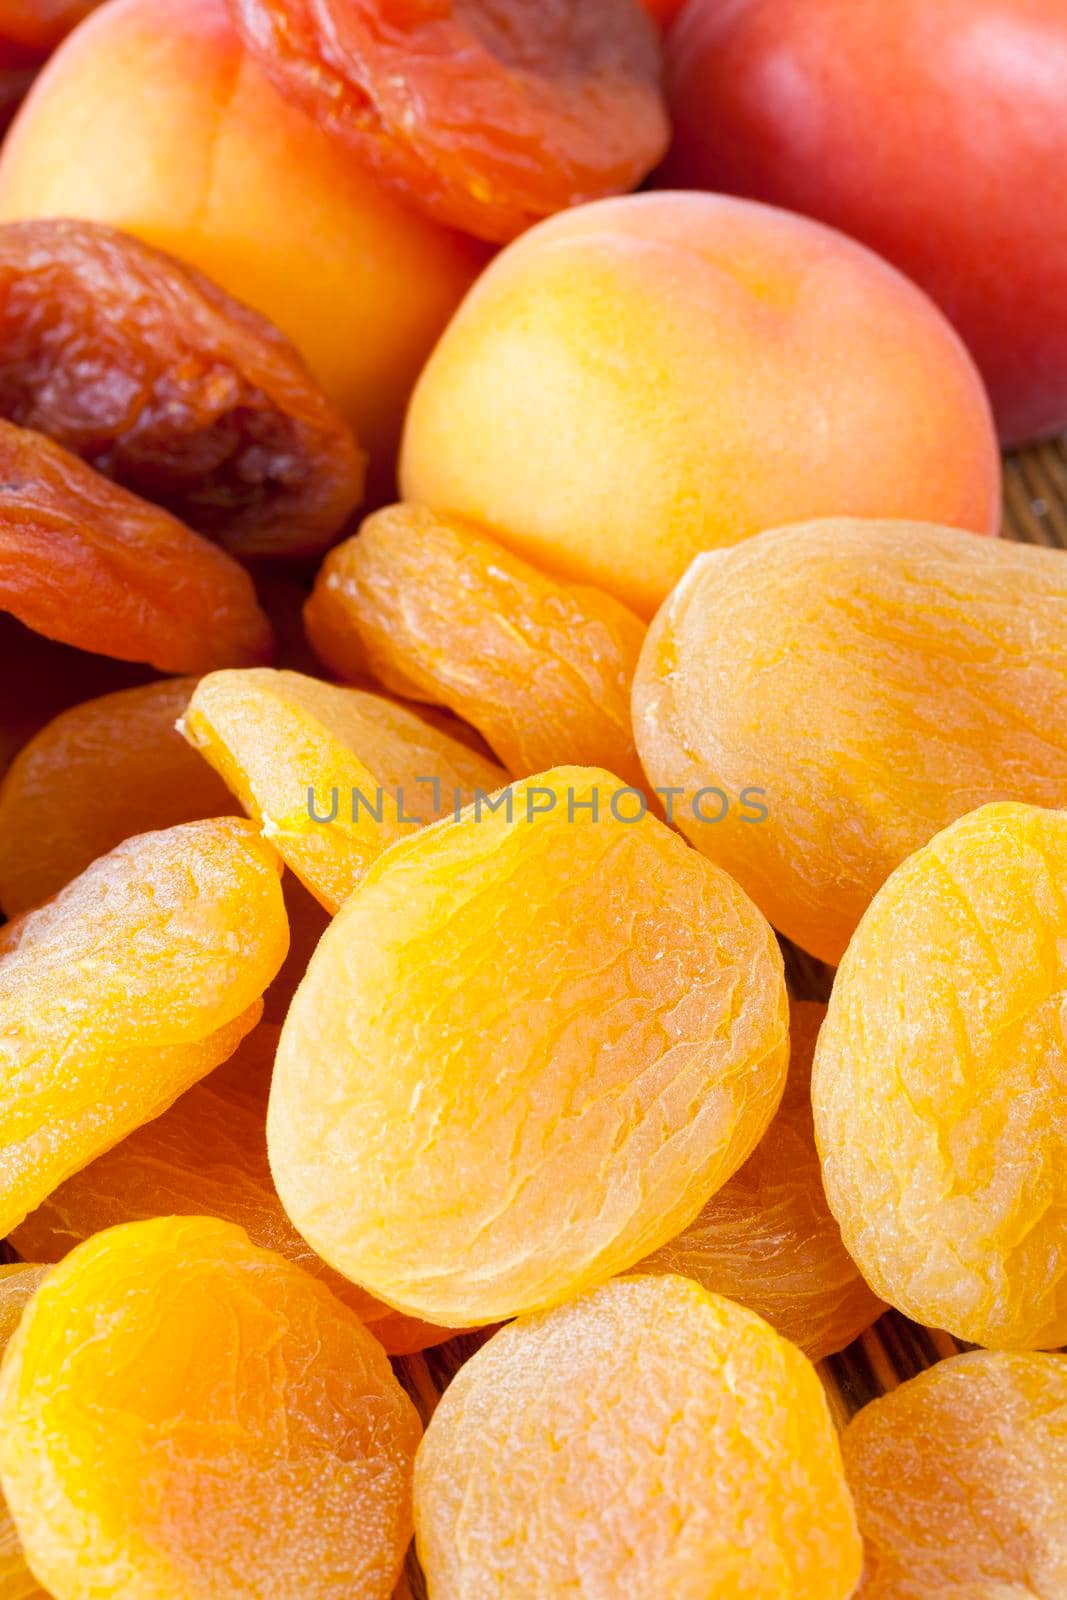 a pile of orange and yellow dried dried apricots, lying together with fresh and ripe apricots on a wooden table, close-up photo